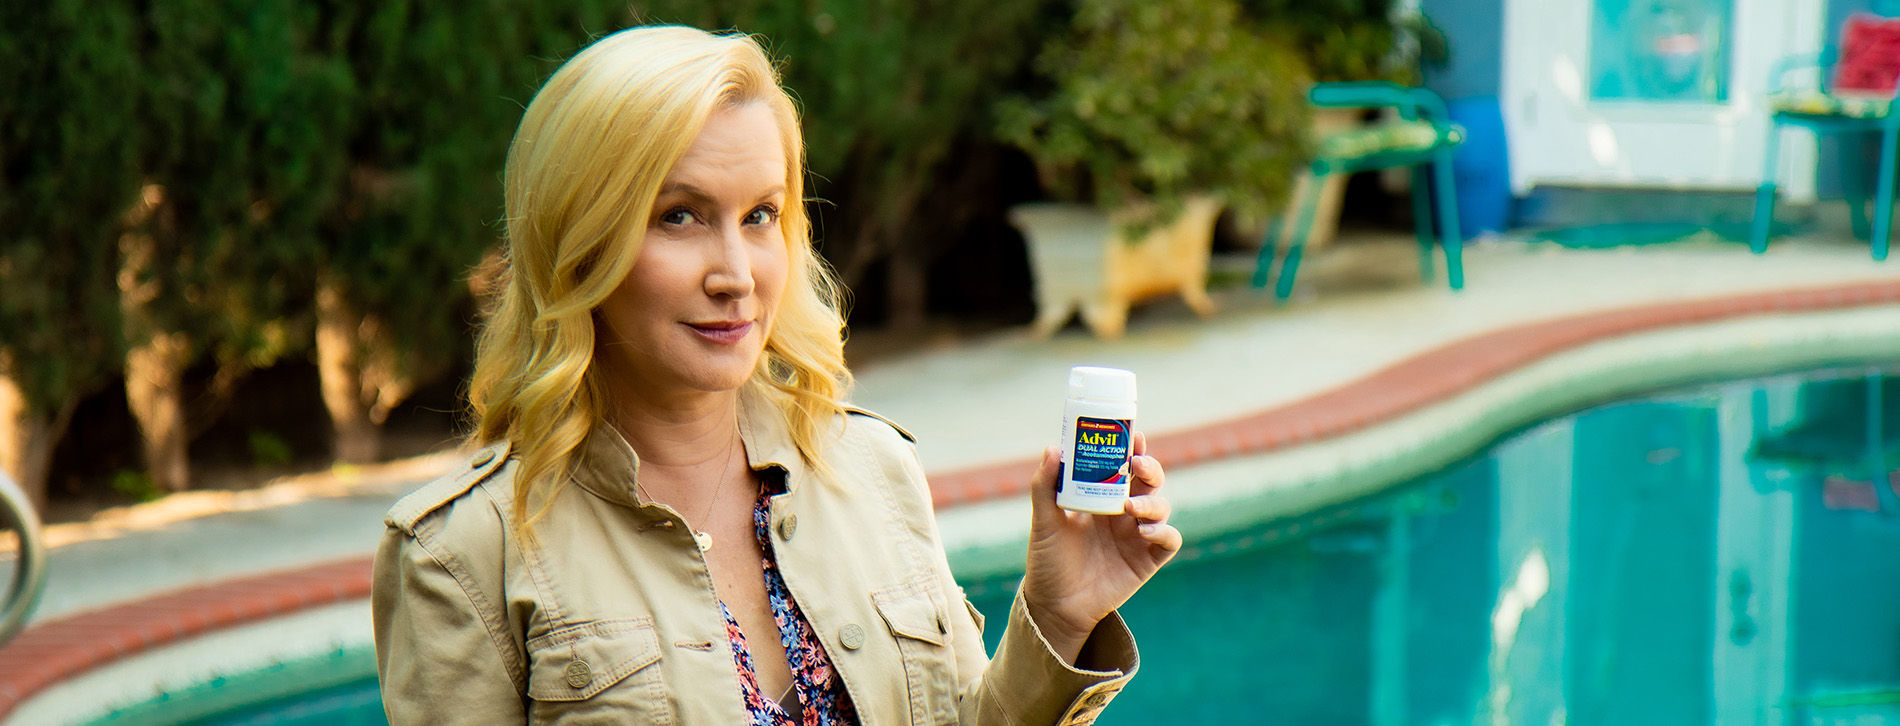 Woman holding a bottle of advil by a pool